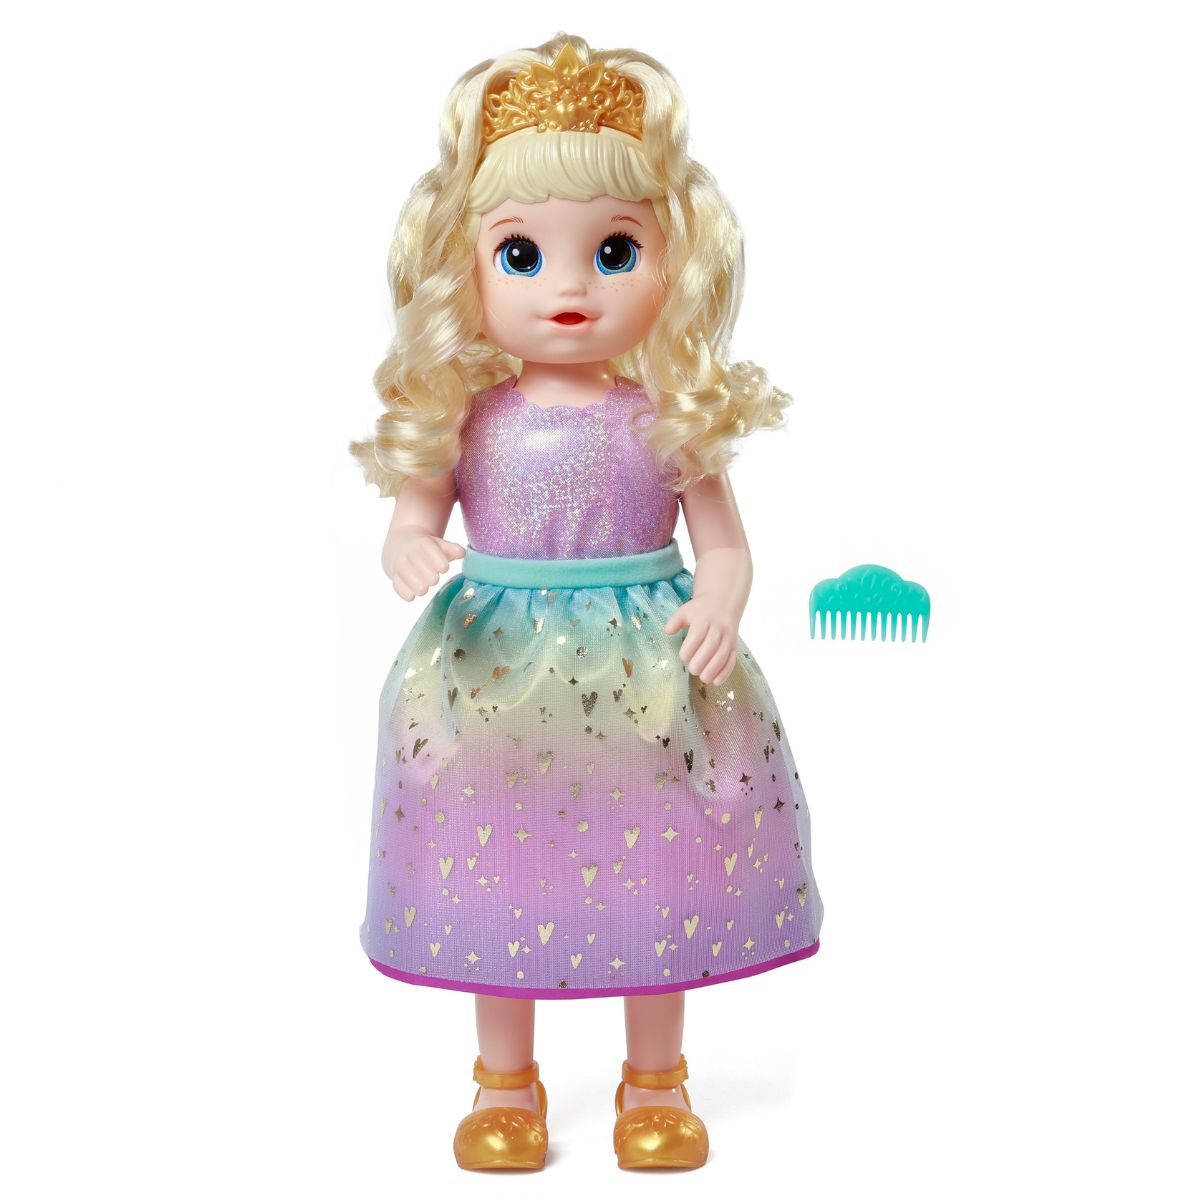 Baby alive grows up Sofia Blonde